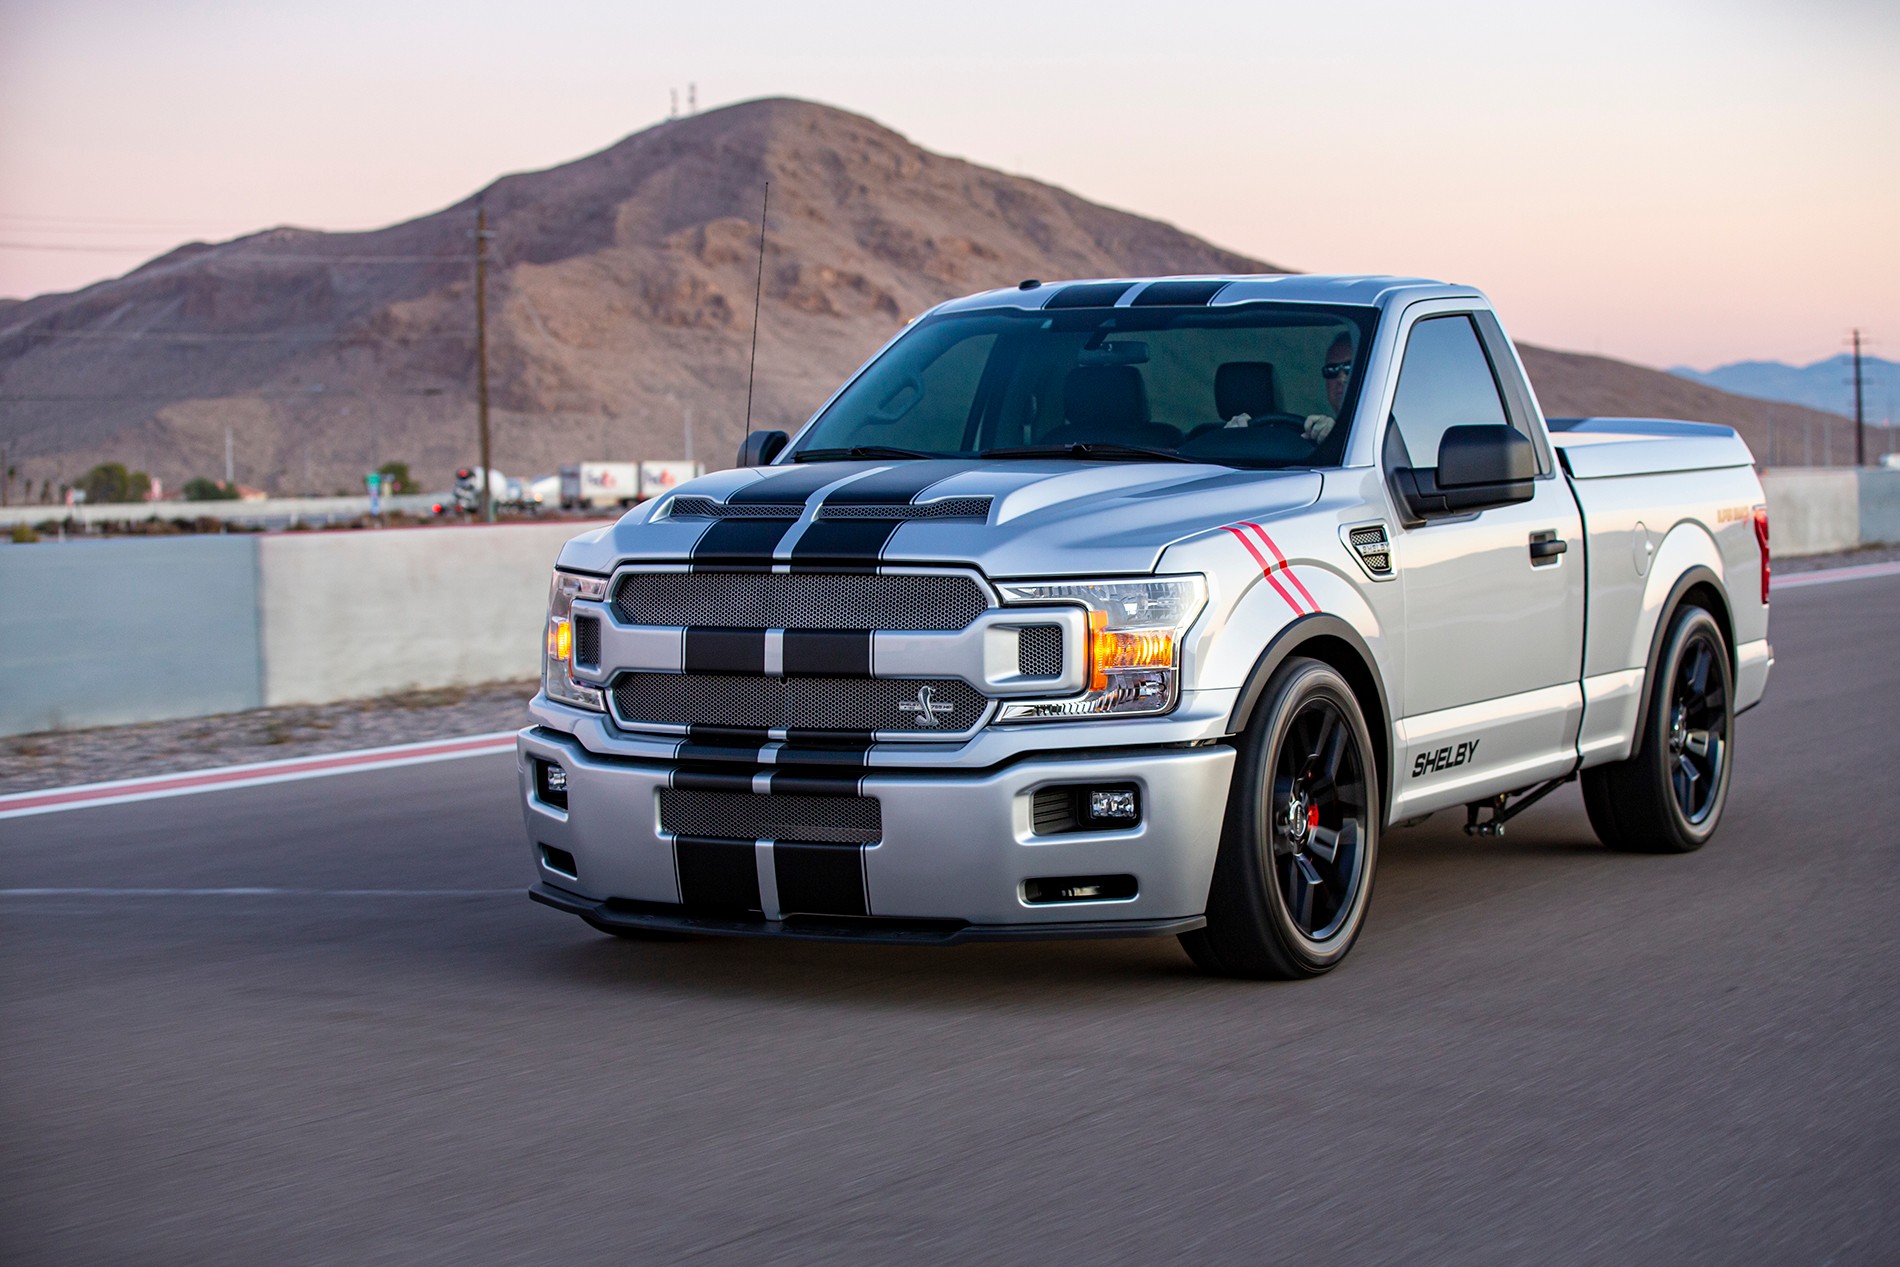 Shelby F150 Super Snake Sport Concept Going Into Production With Up To